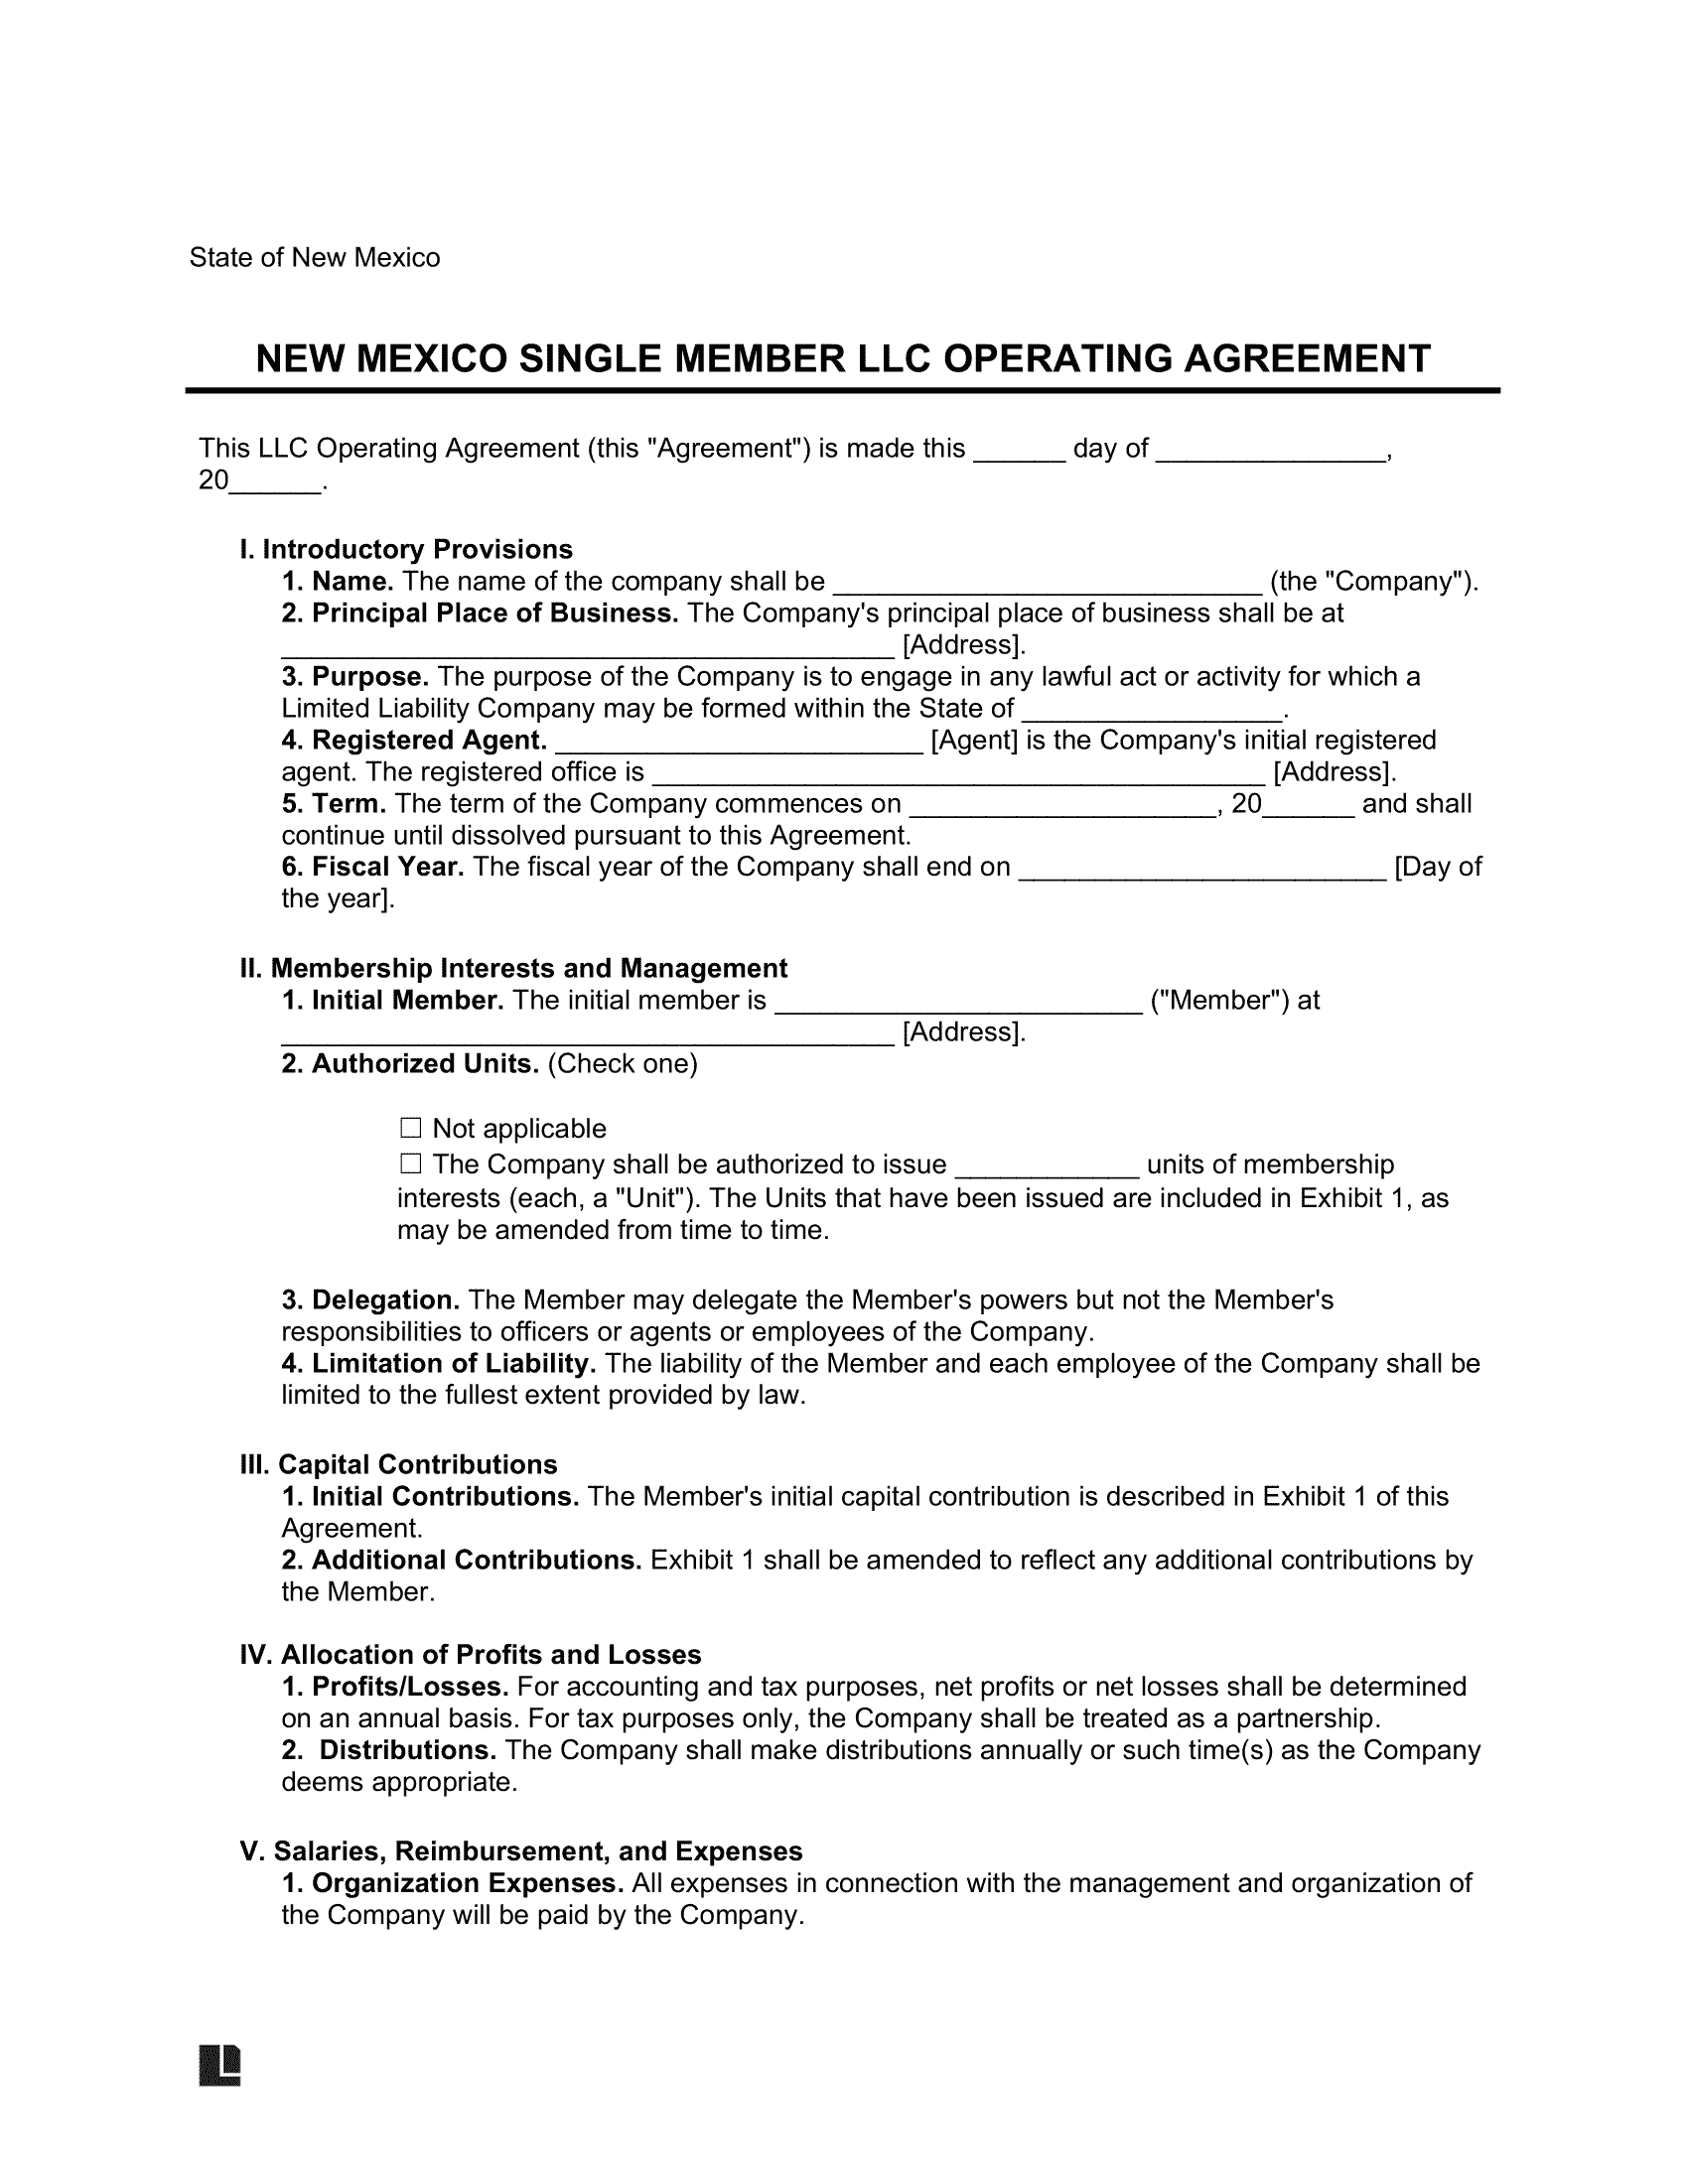 New Mexico Single Member LLC Operating Agreement Form